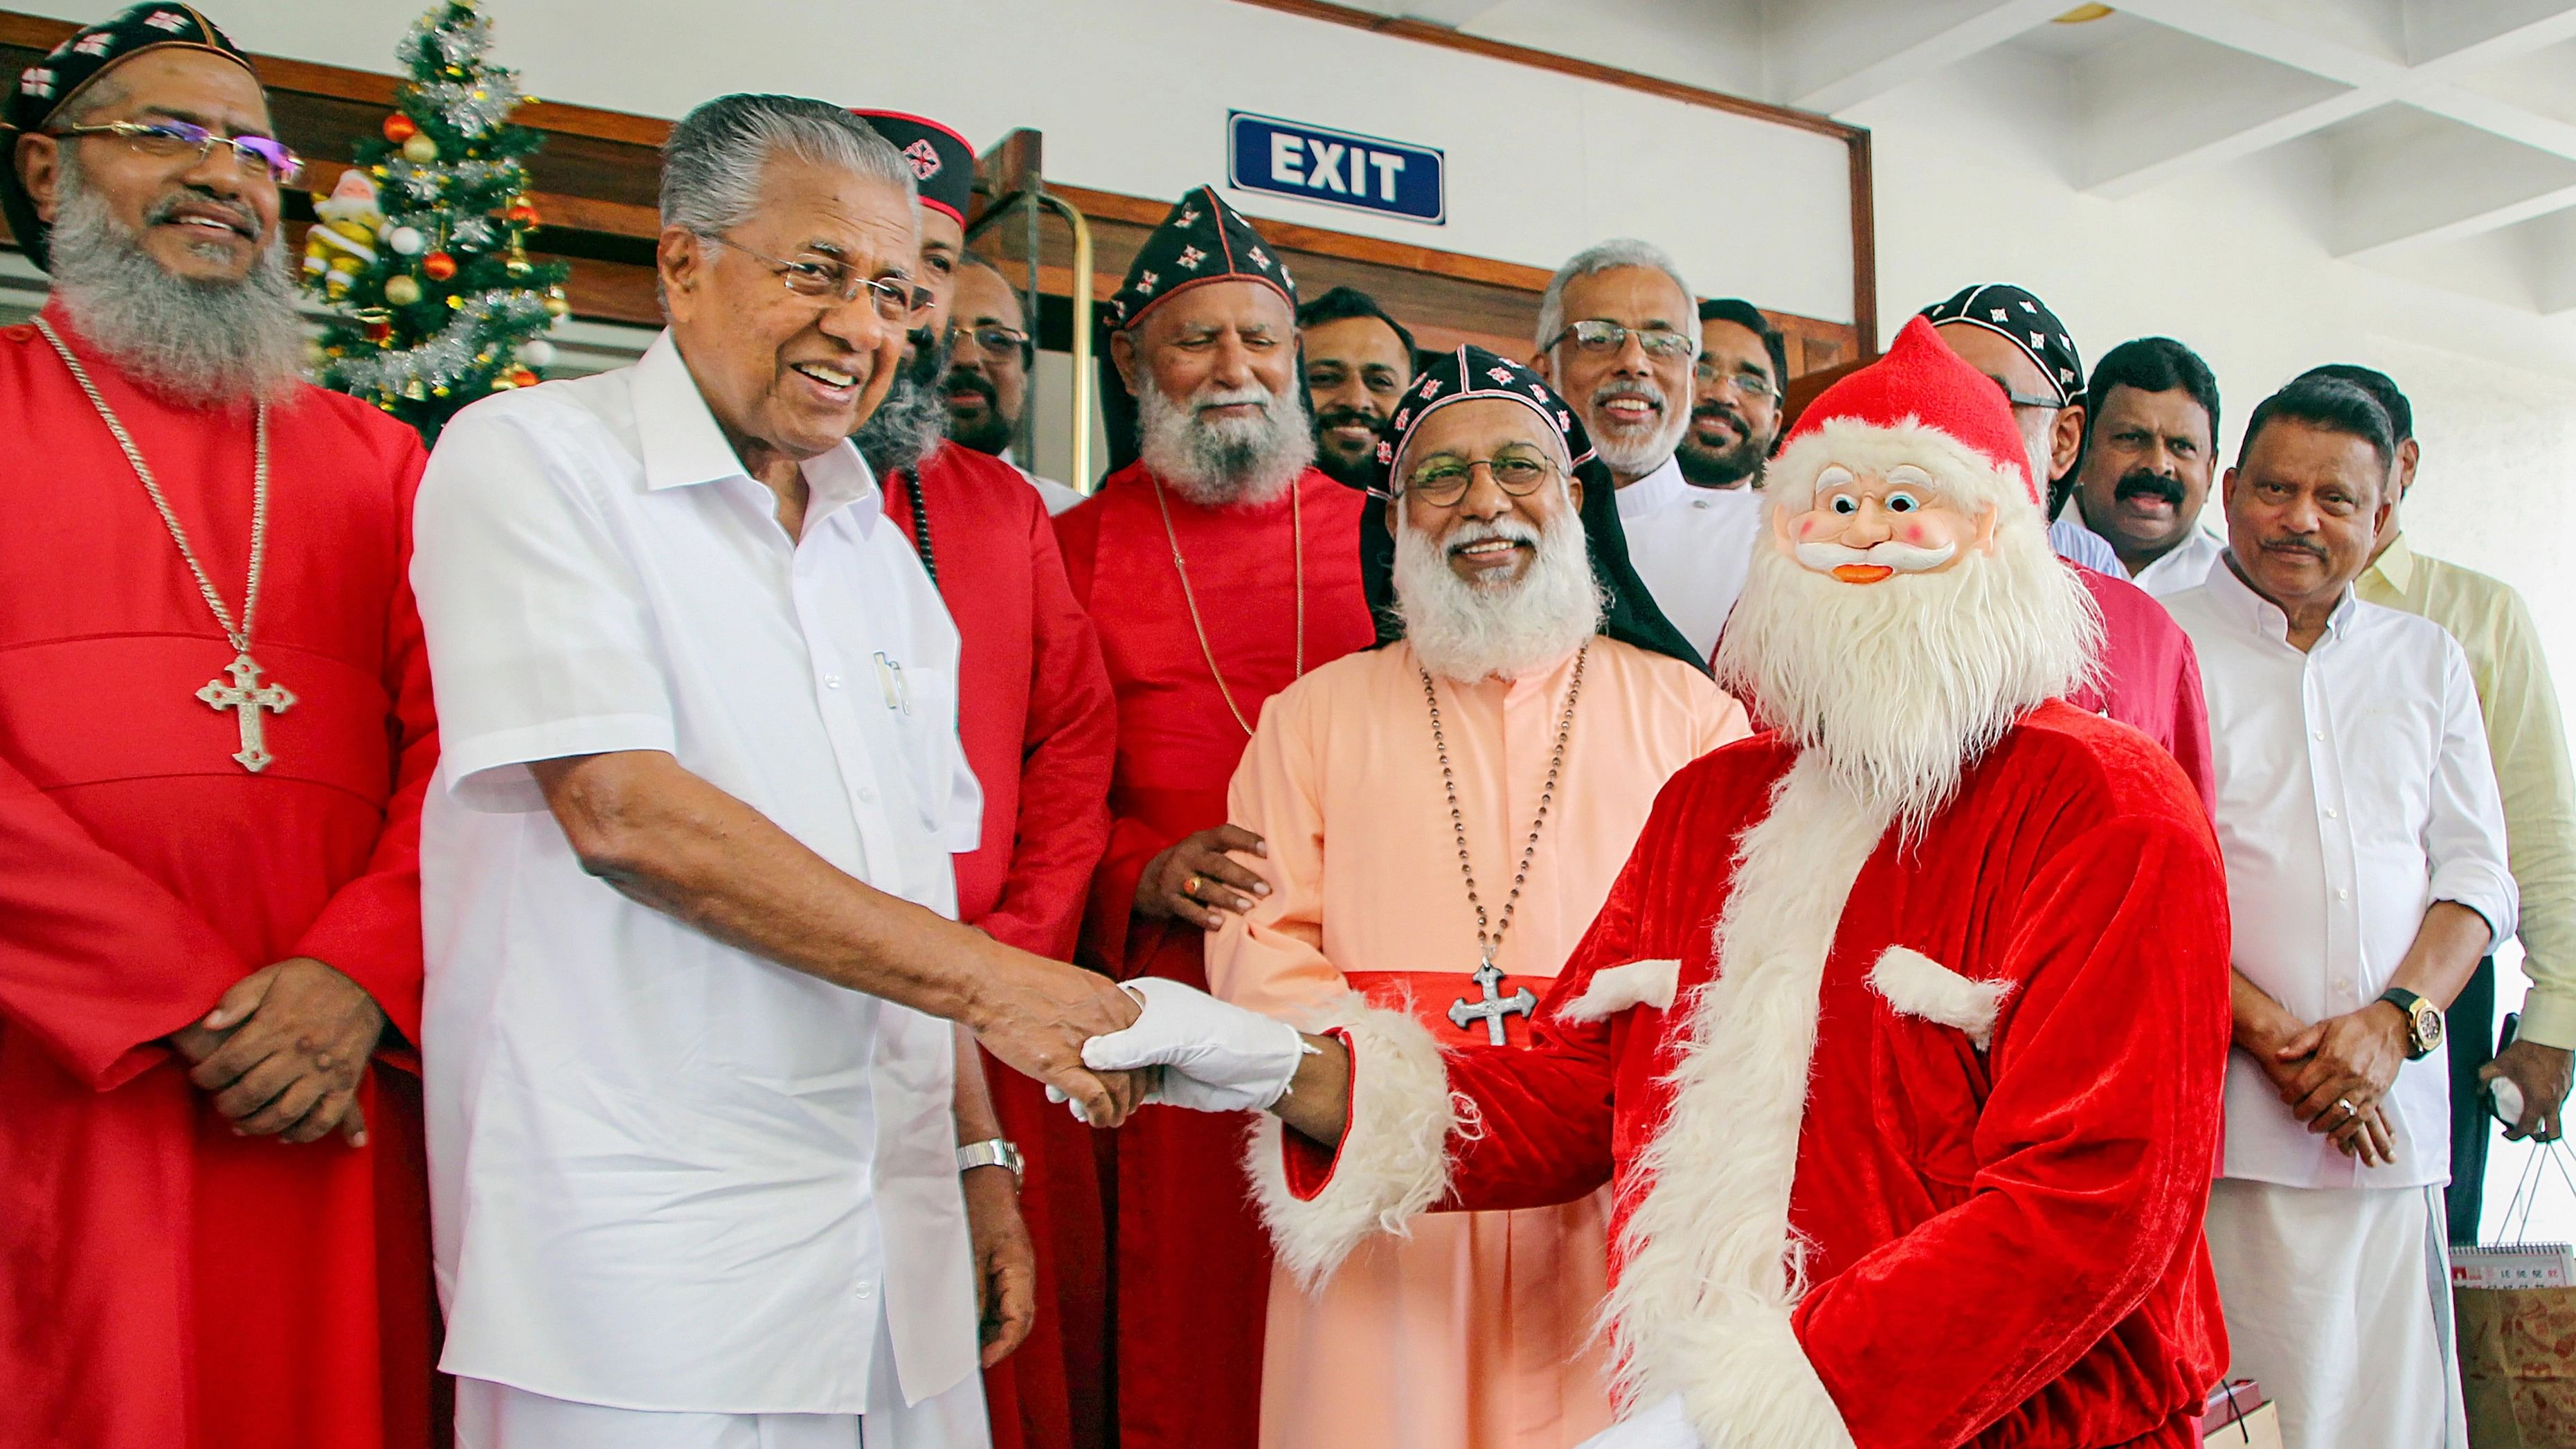 <div class="paragraphs"><p>Kerala Chief Minister Pinarayi Vijayan greets a man dressed as Santa Claus during the Christmas-New Year lunch hosted in Thiruvananthapuram.</p></div>